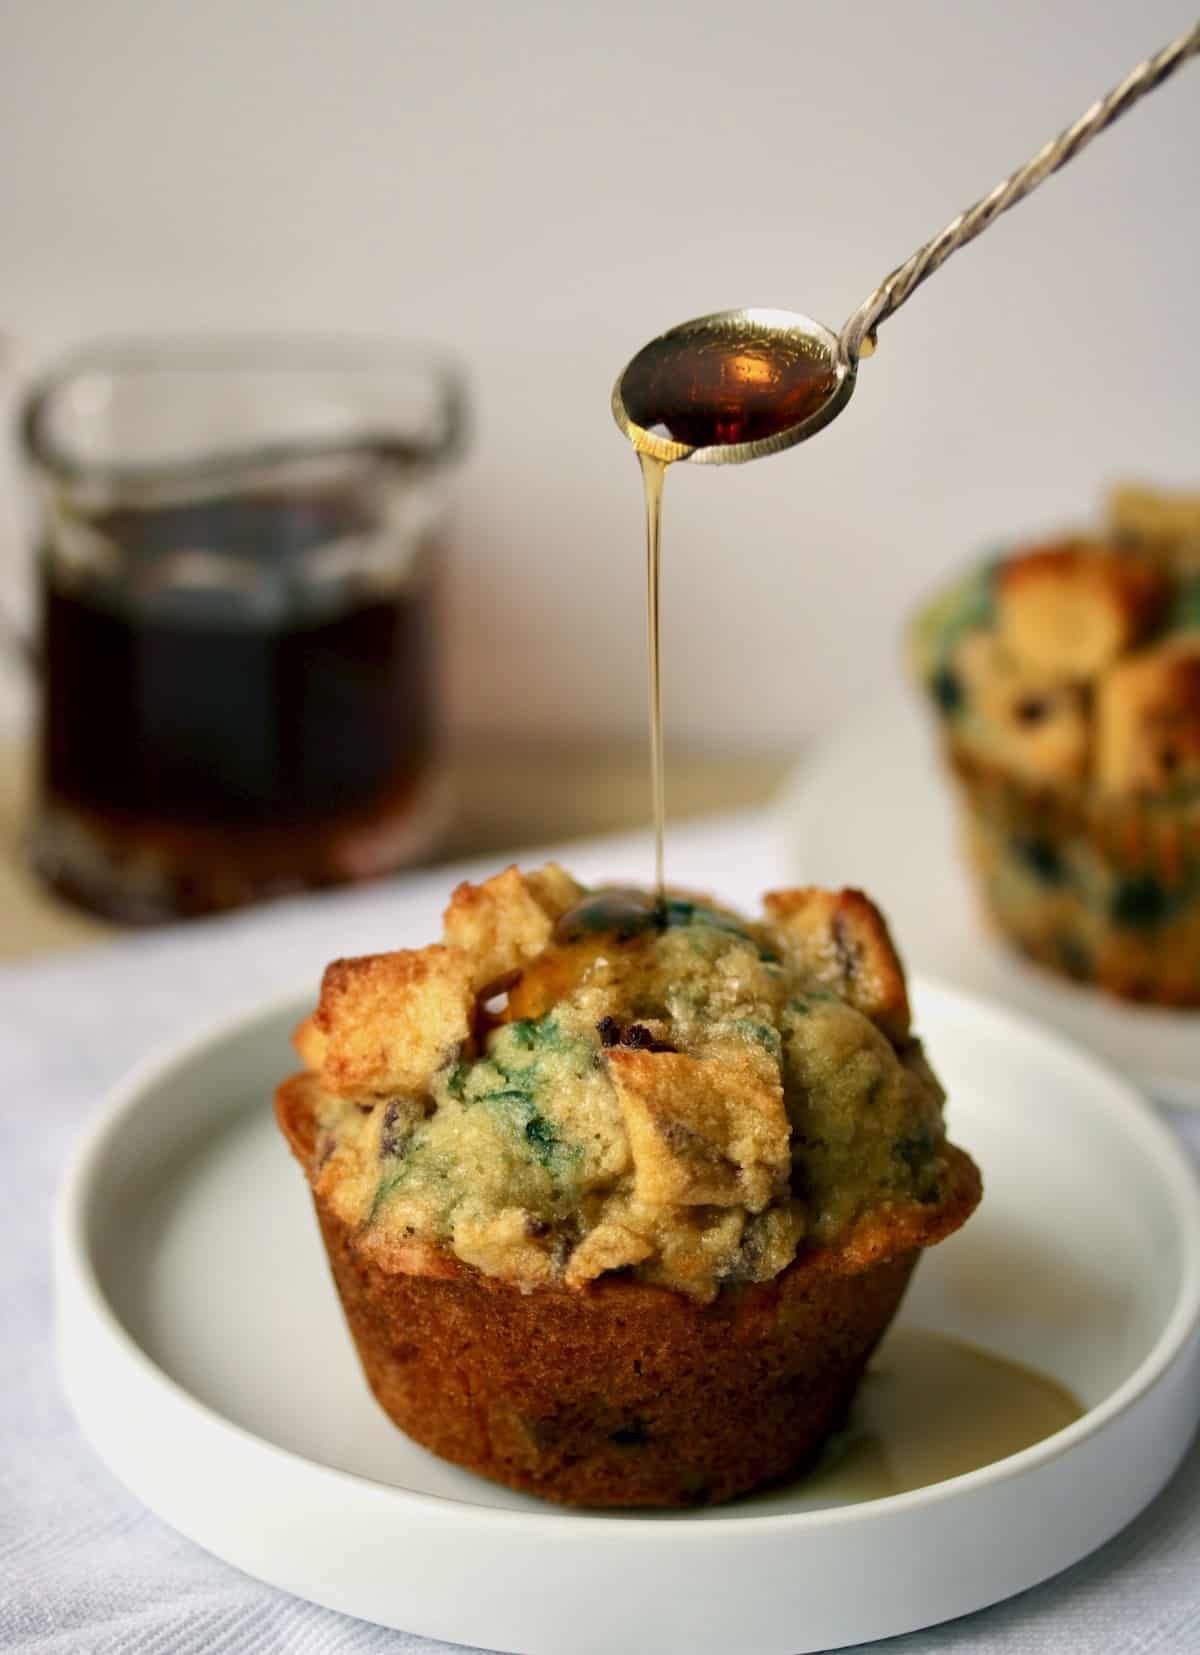 Blueberry French toast muffins with maple syrup.